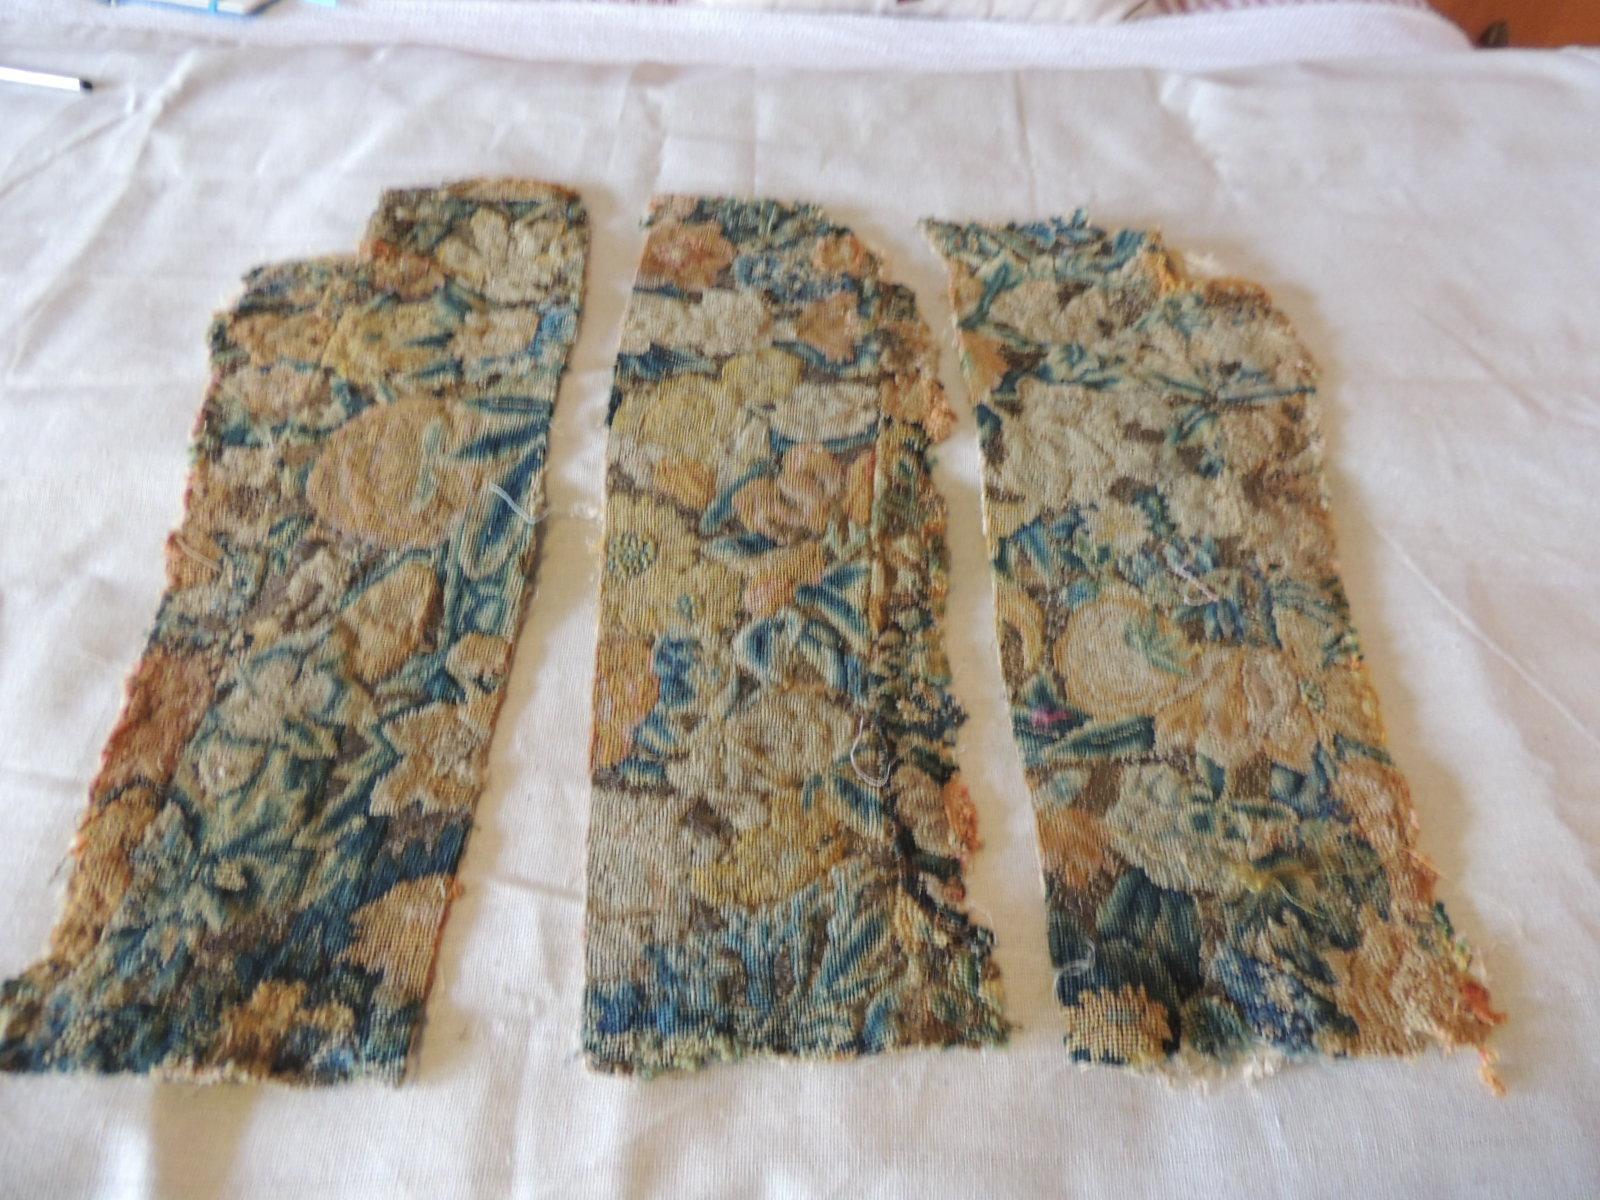 Antique set of (3) Floral Tapestry fragments.
Sizes range from 21 to 21.5 L by 7